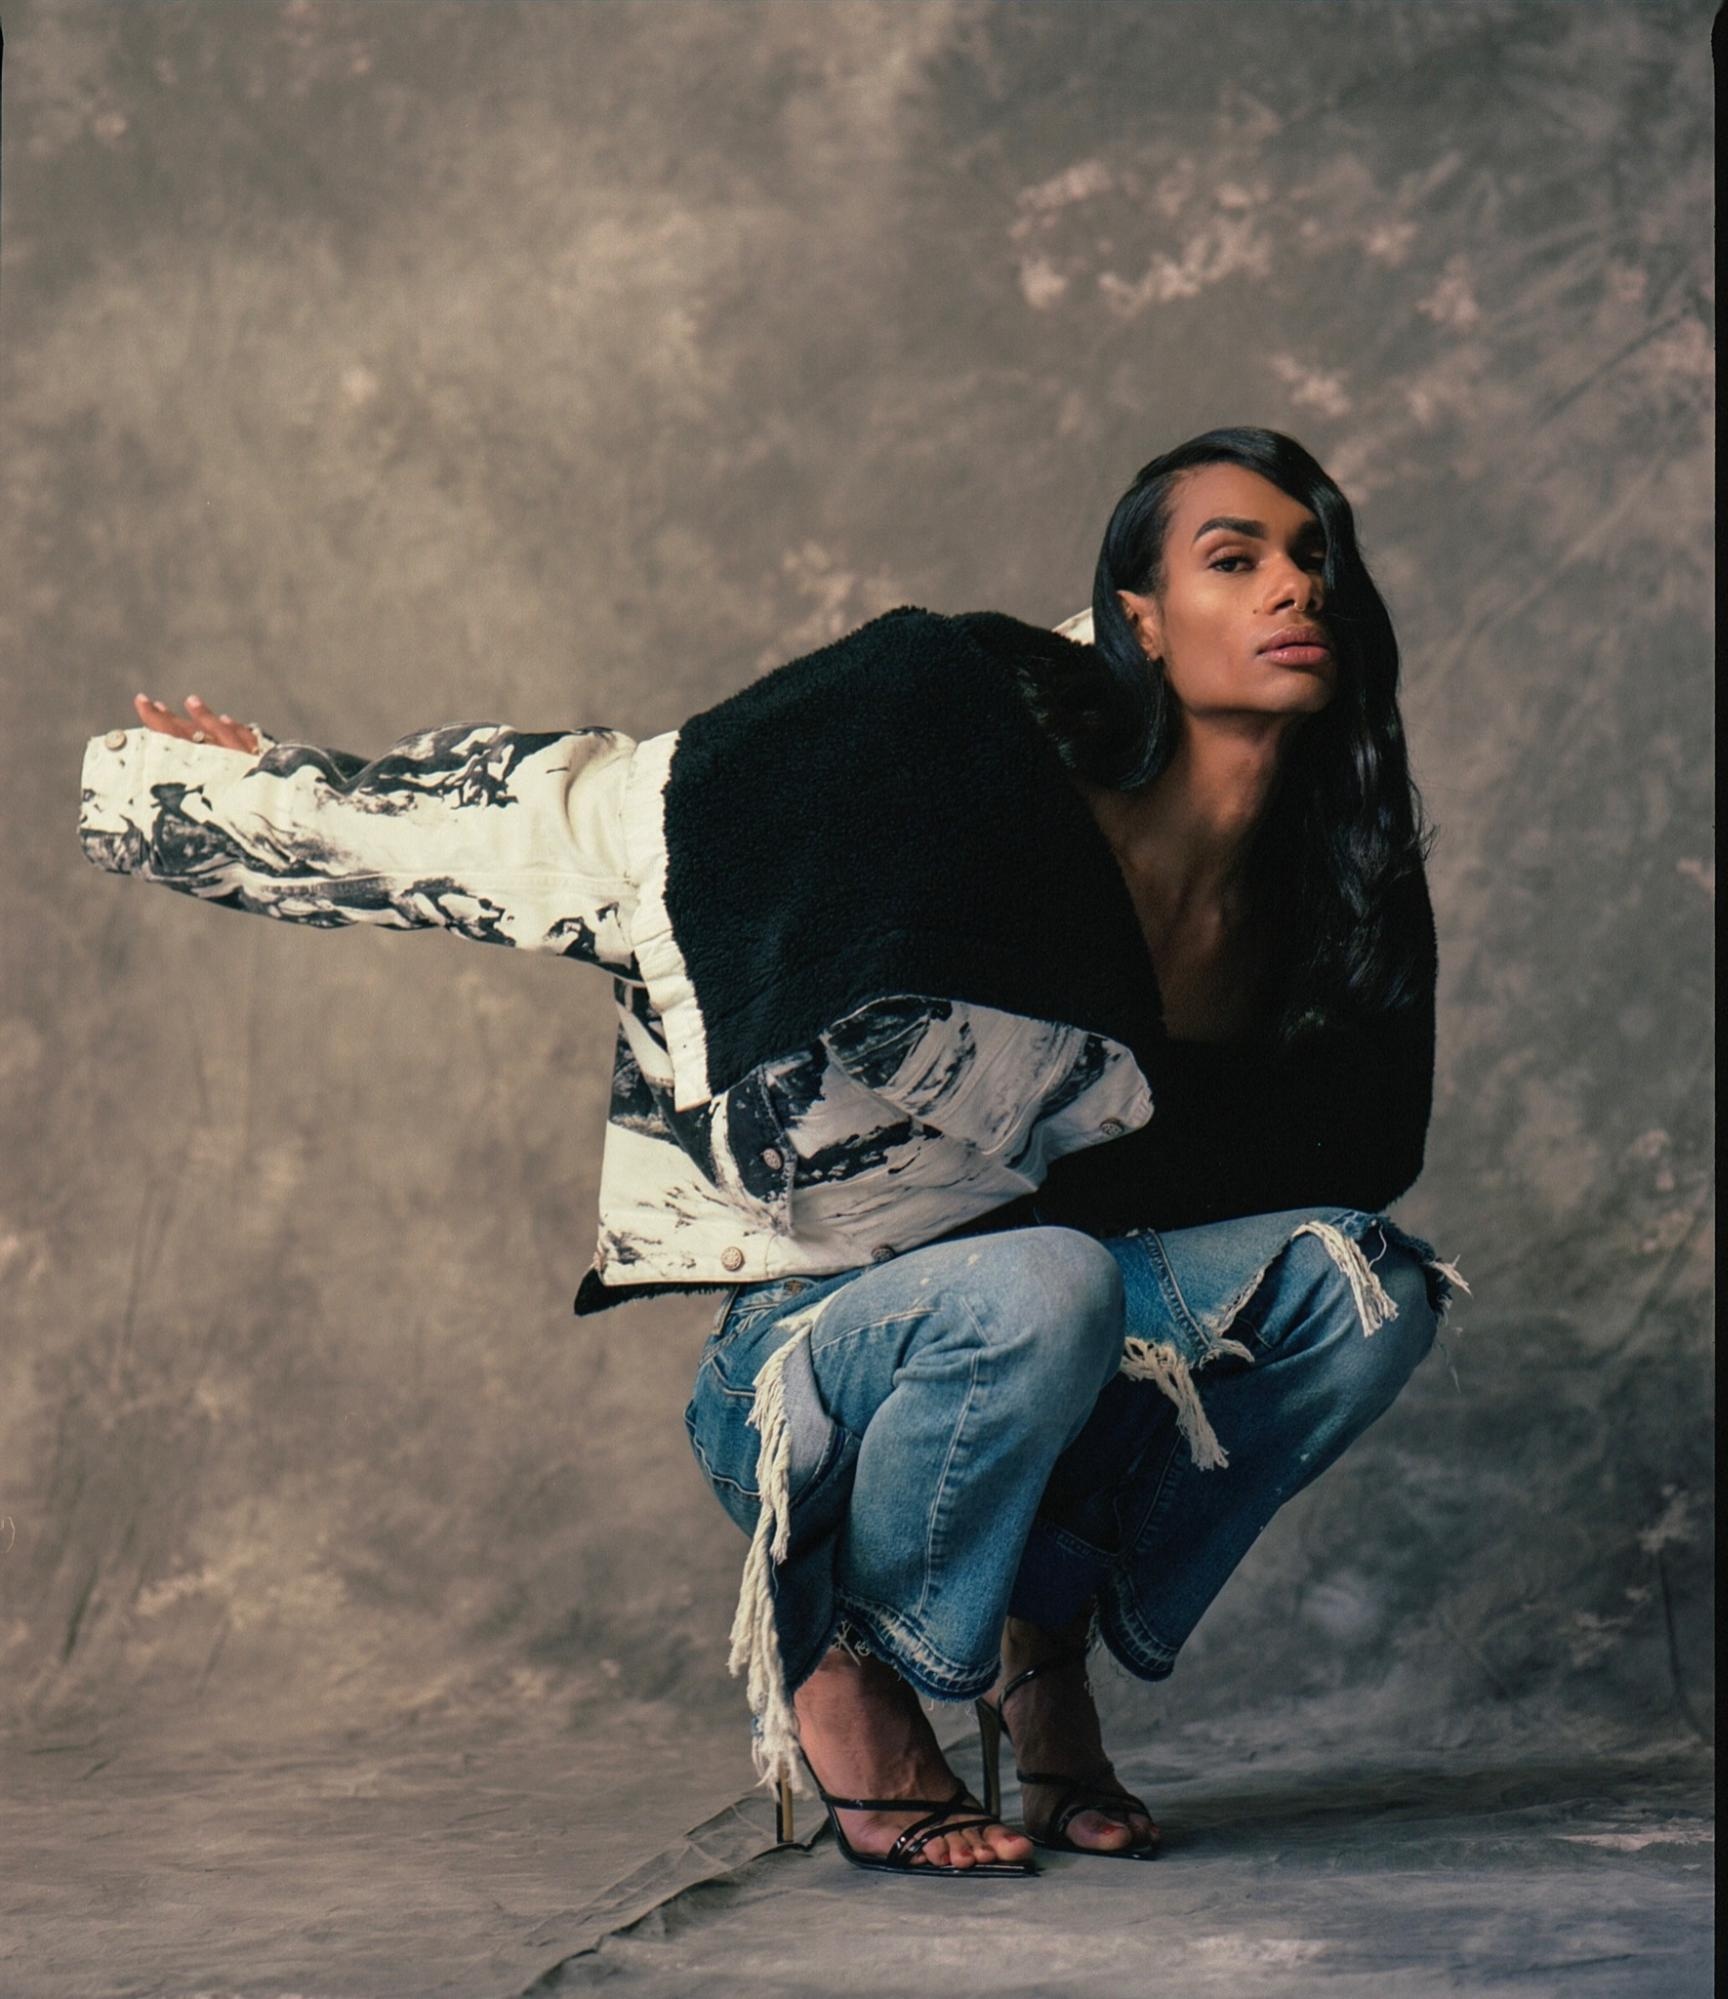 A portrait of artist z tye crouching in heels and a pair of jeans against a studio backdrop with arms outstretched behind her. Her black, straightened, wavy hair falls over one eye.